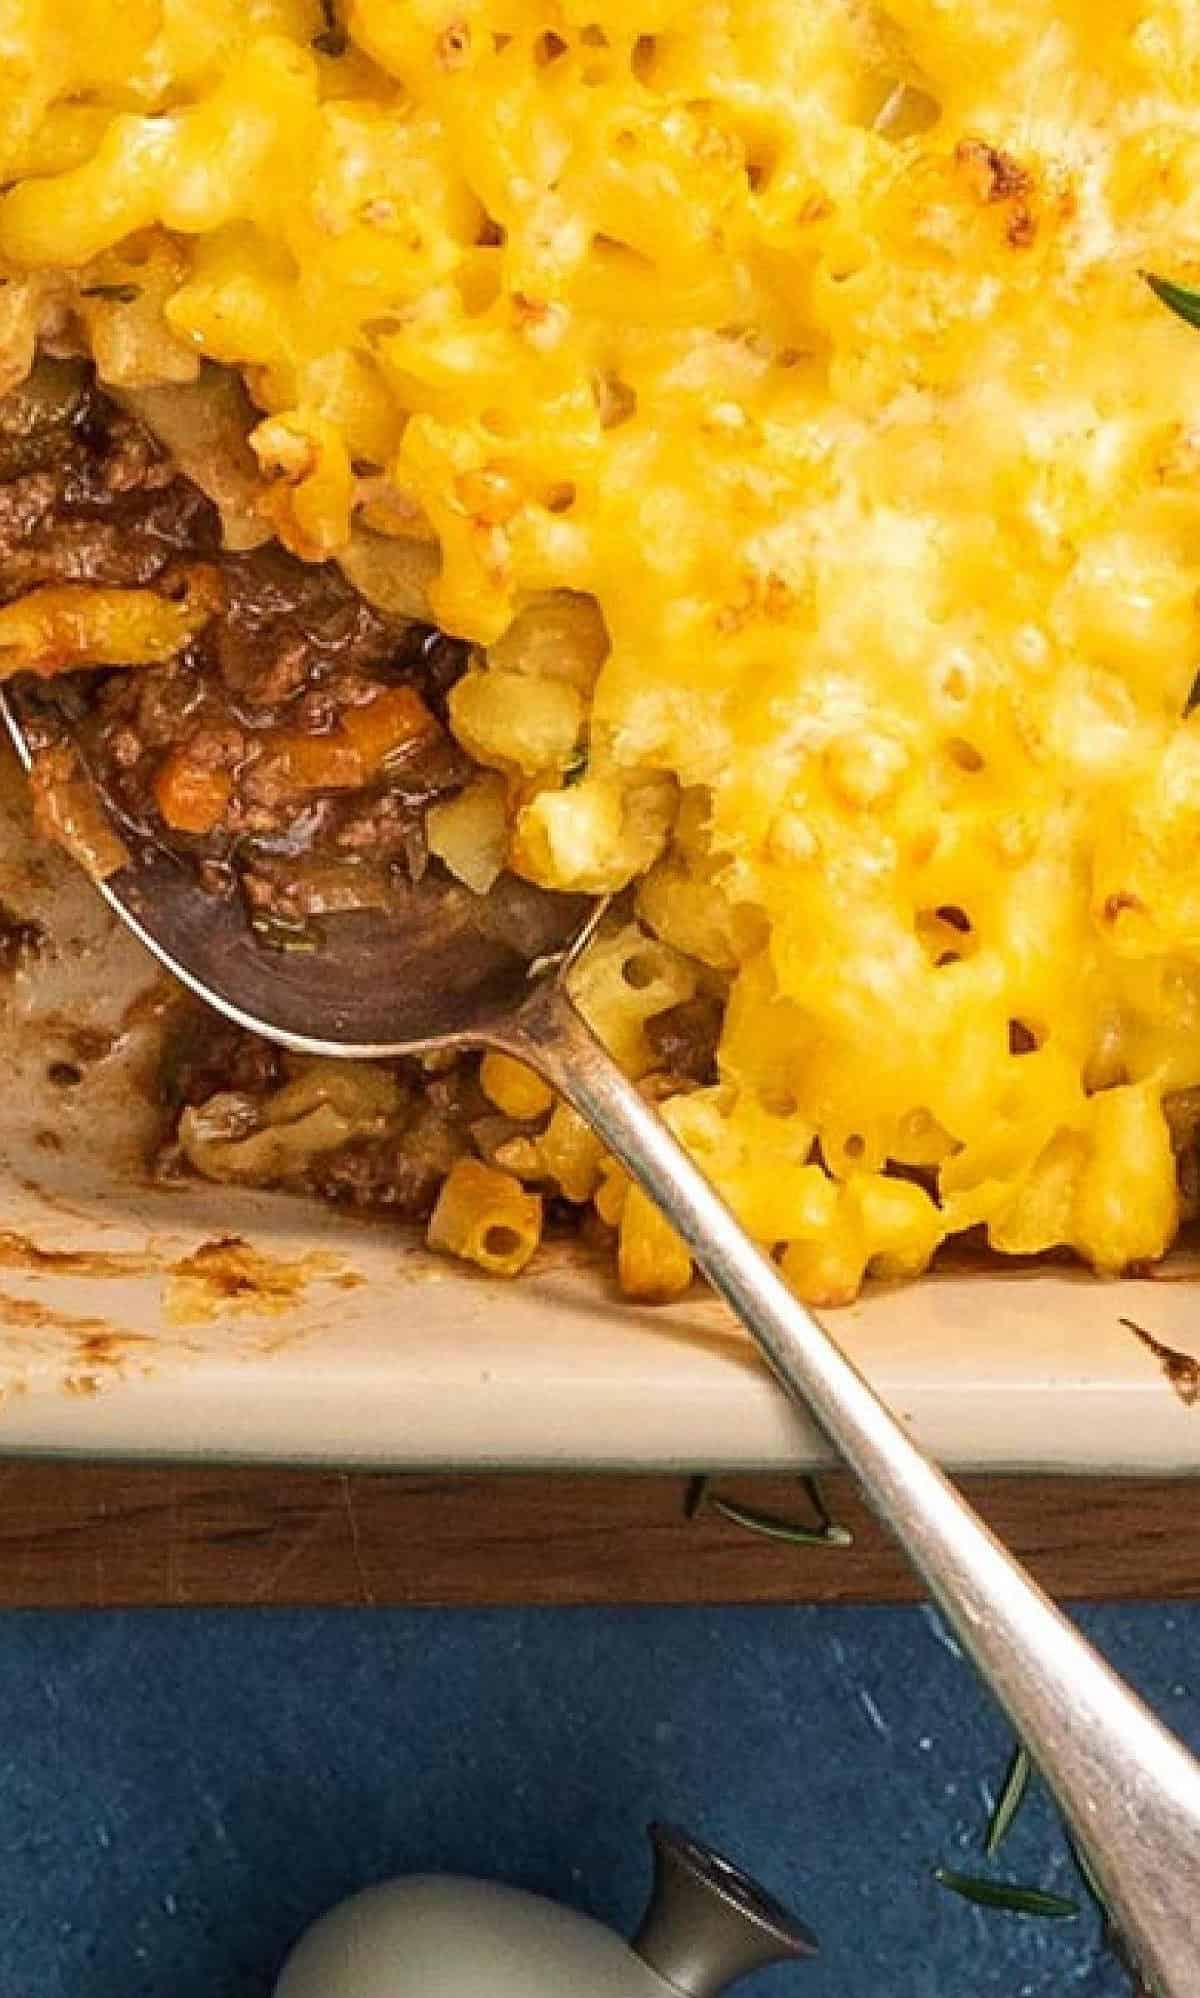  Mac and cheese meet pie - the ultimate comfort food!